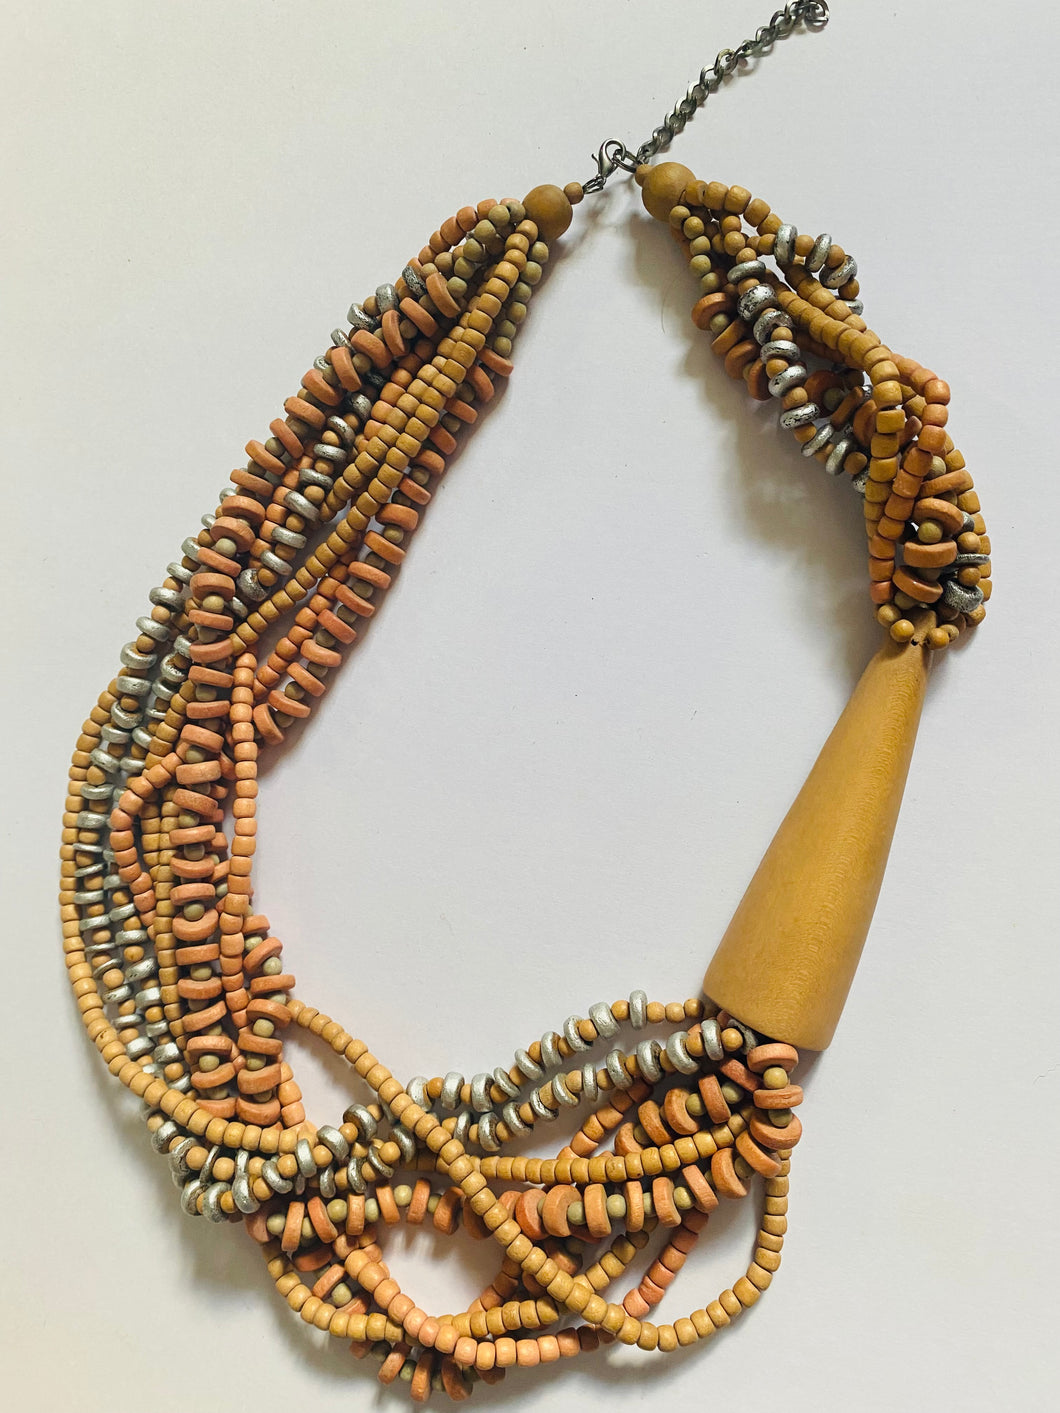 Bali Woven Beaded Necklace